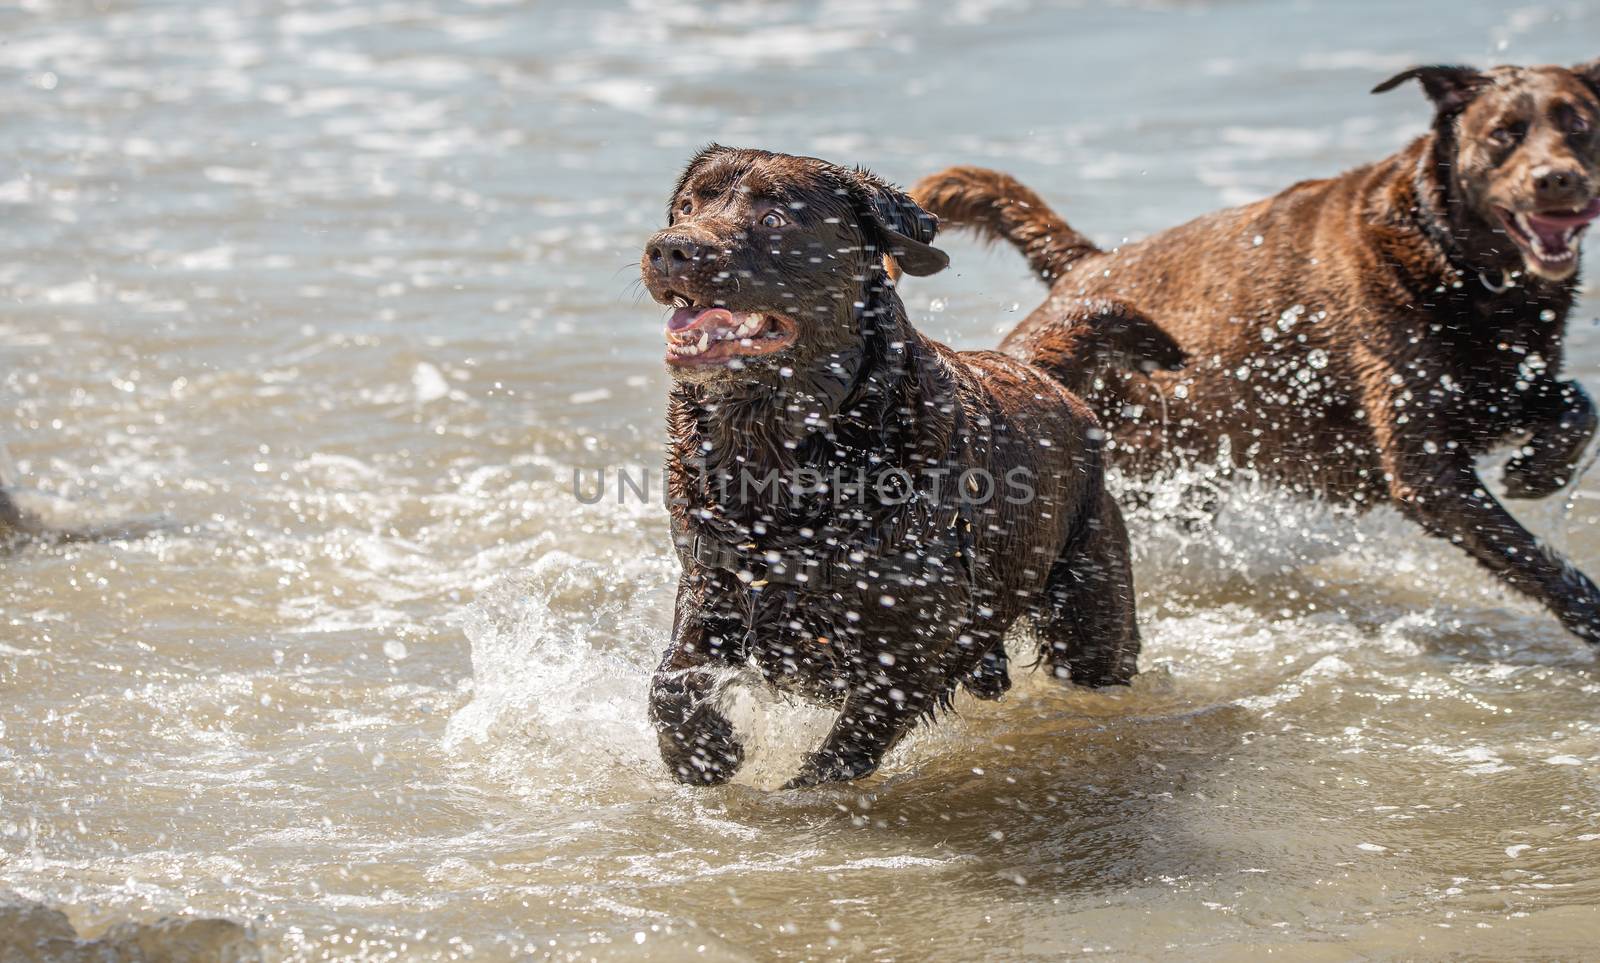 Chocolate labrador retriever dogs enjoying a day out at the seaside by Pendleton